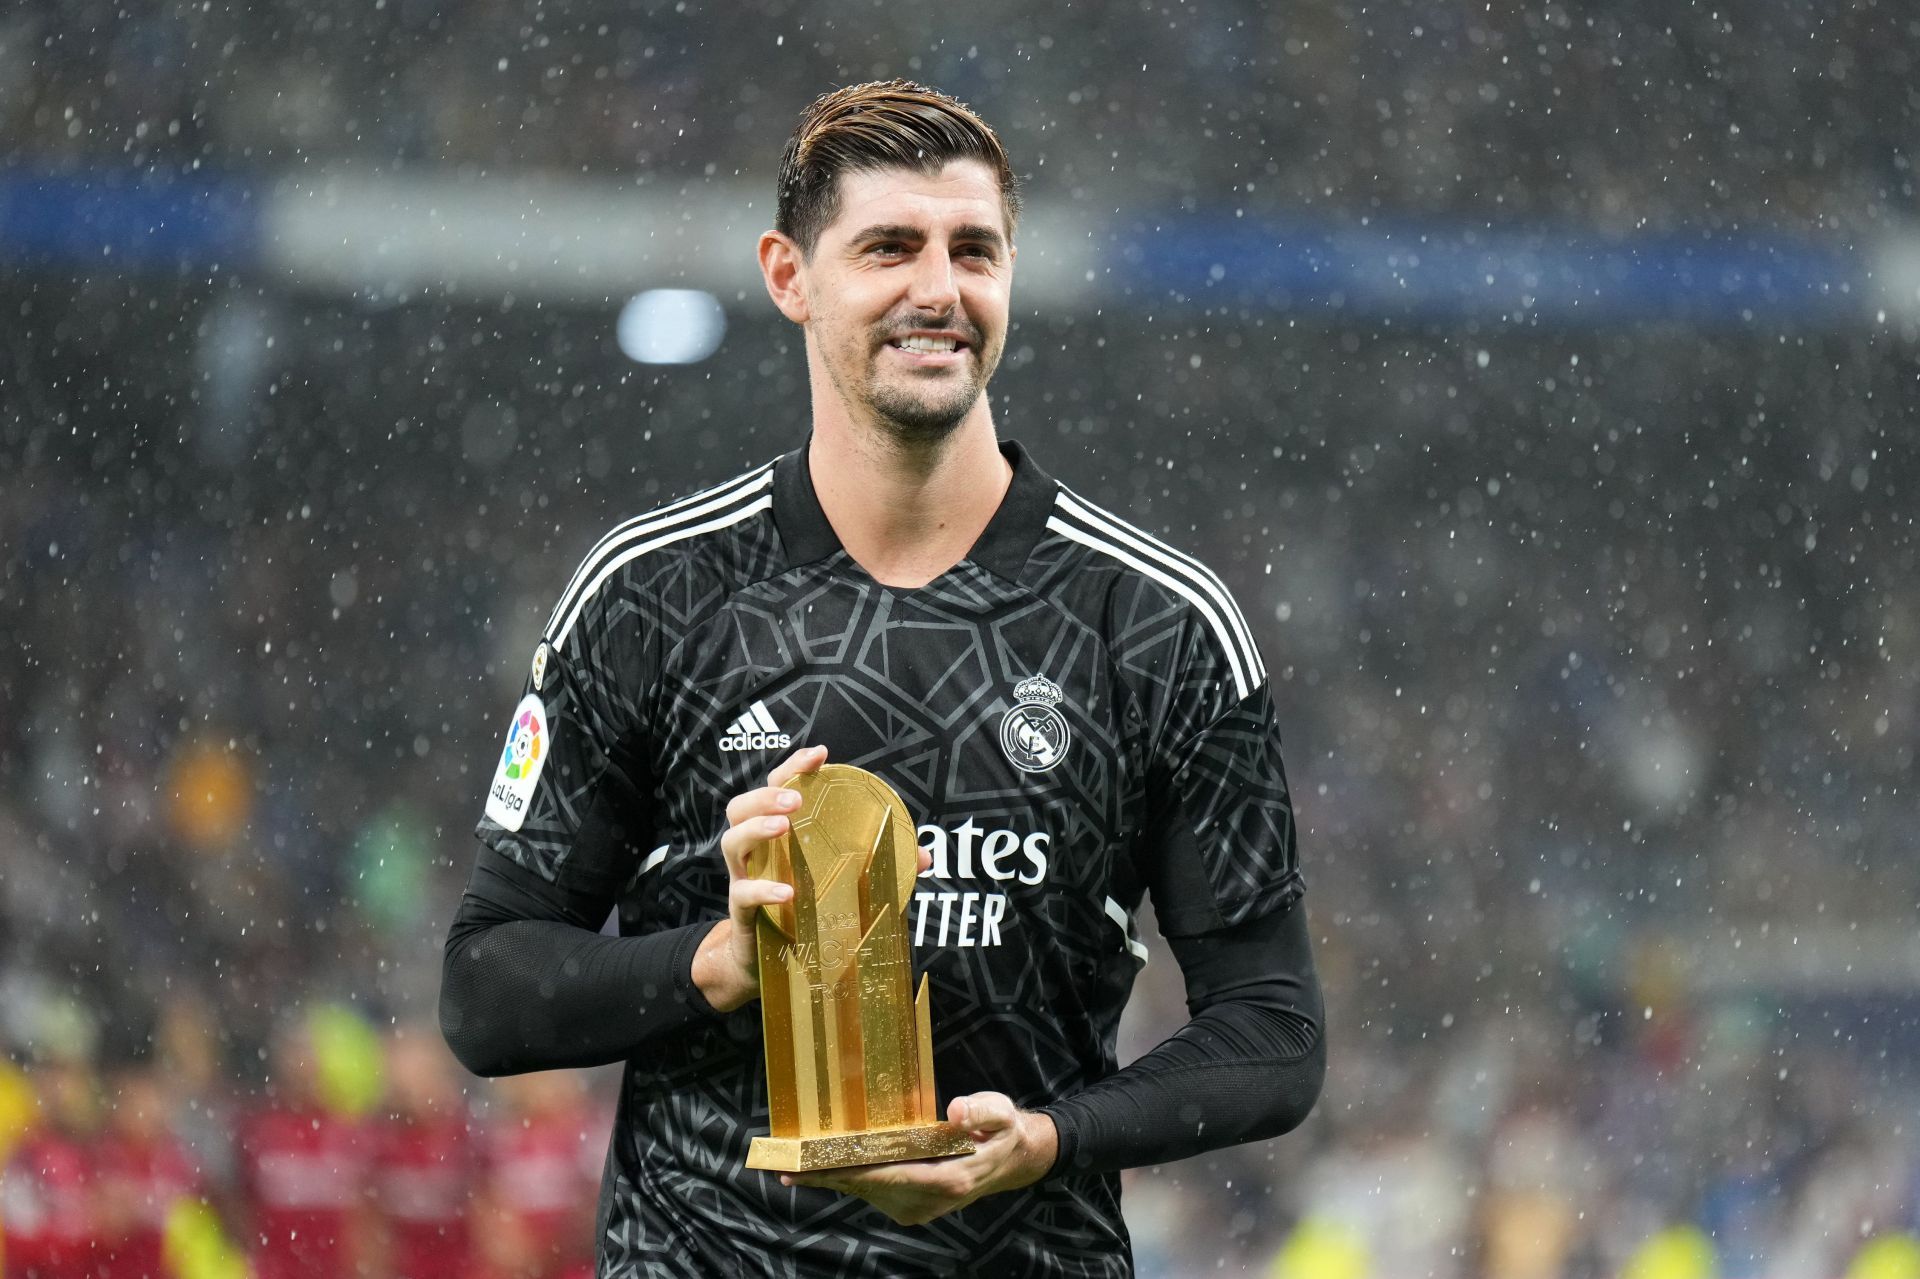 Thibaut Courtois is among the finest goalkeepers in the world at the moment.